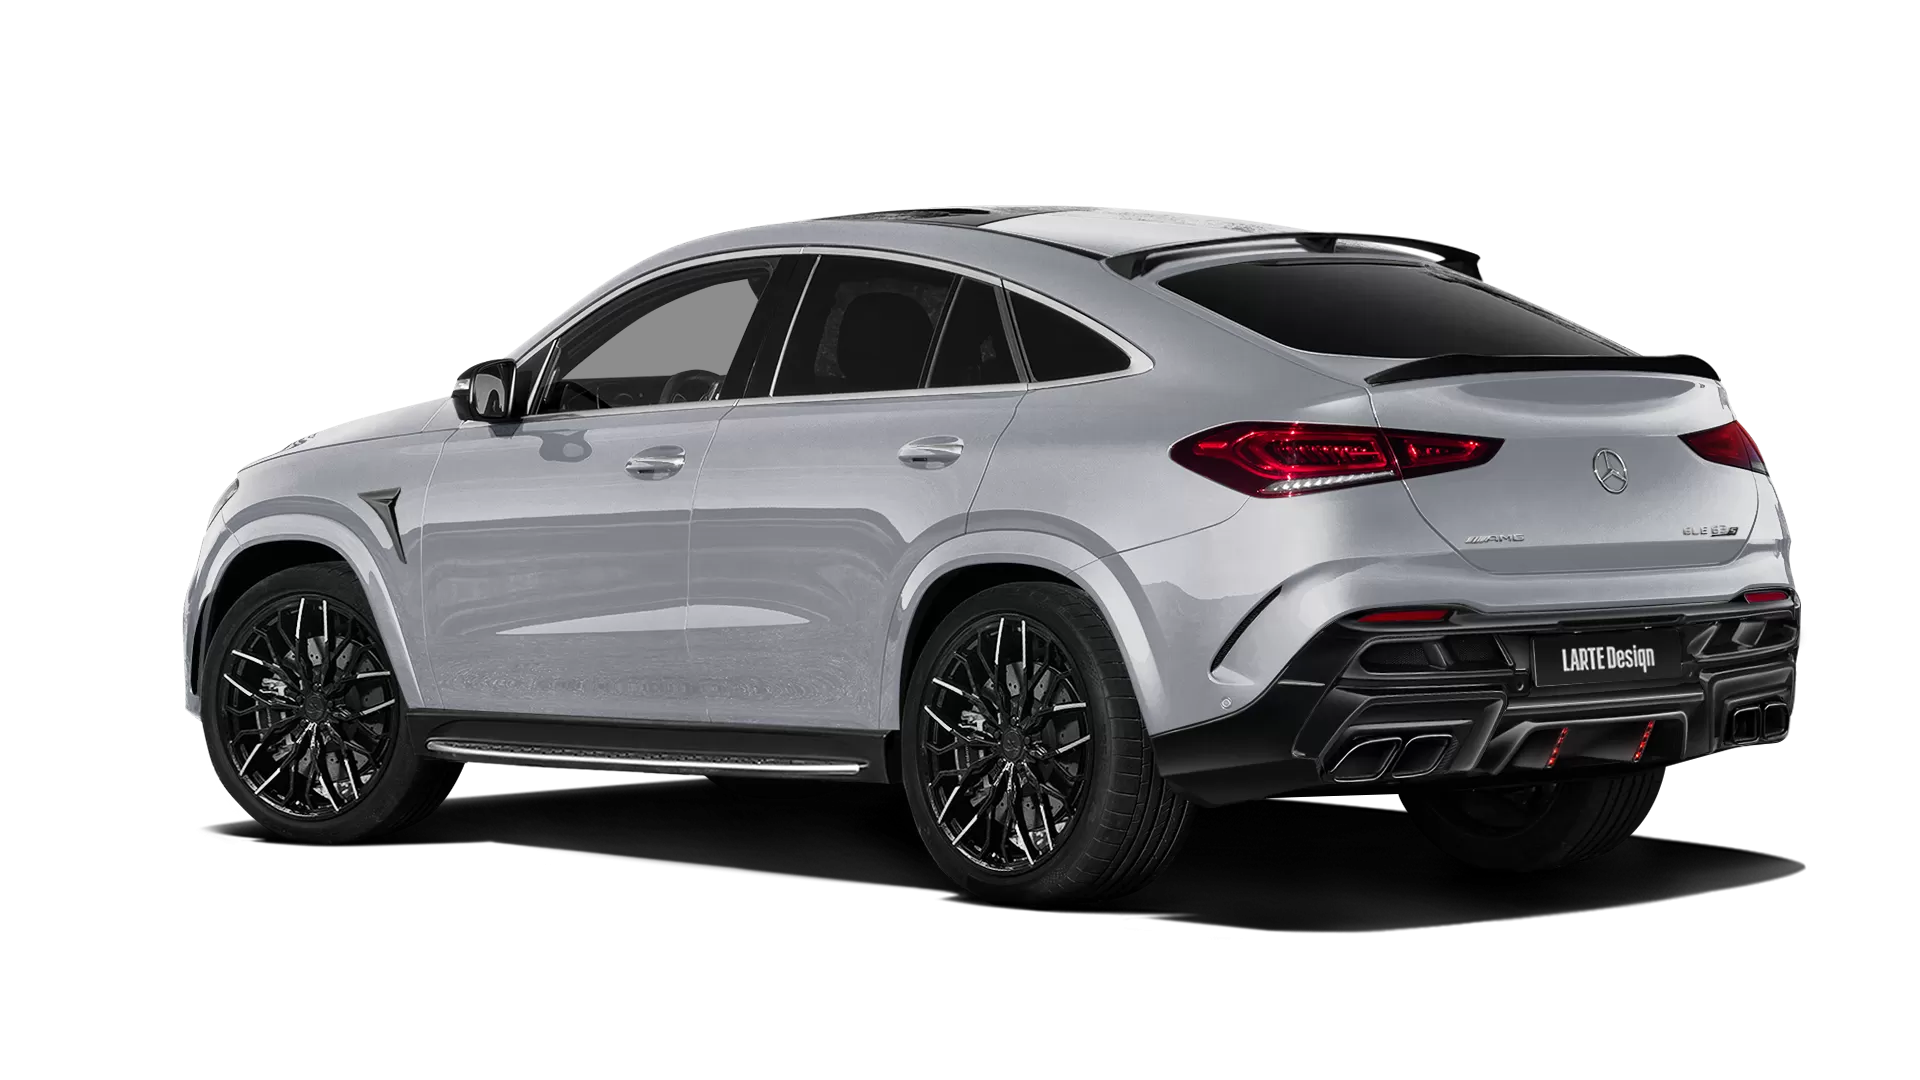 Mercedes GLE Coupe AMG 63 C167 with painted body kit: rear view shown in High Tech Silver